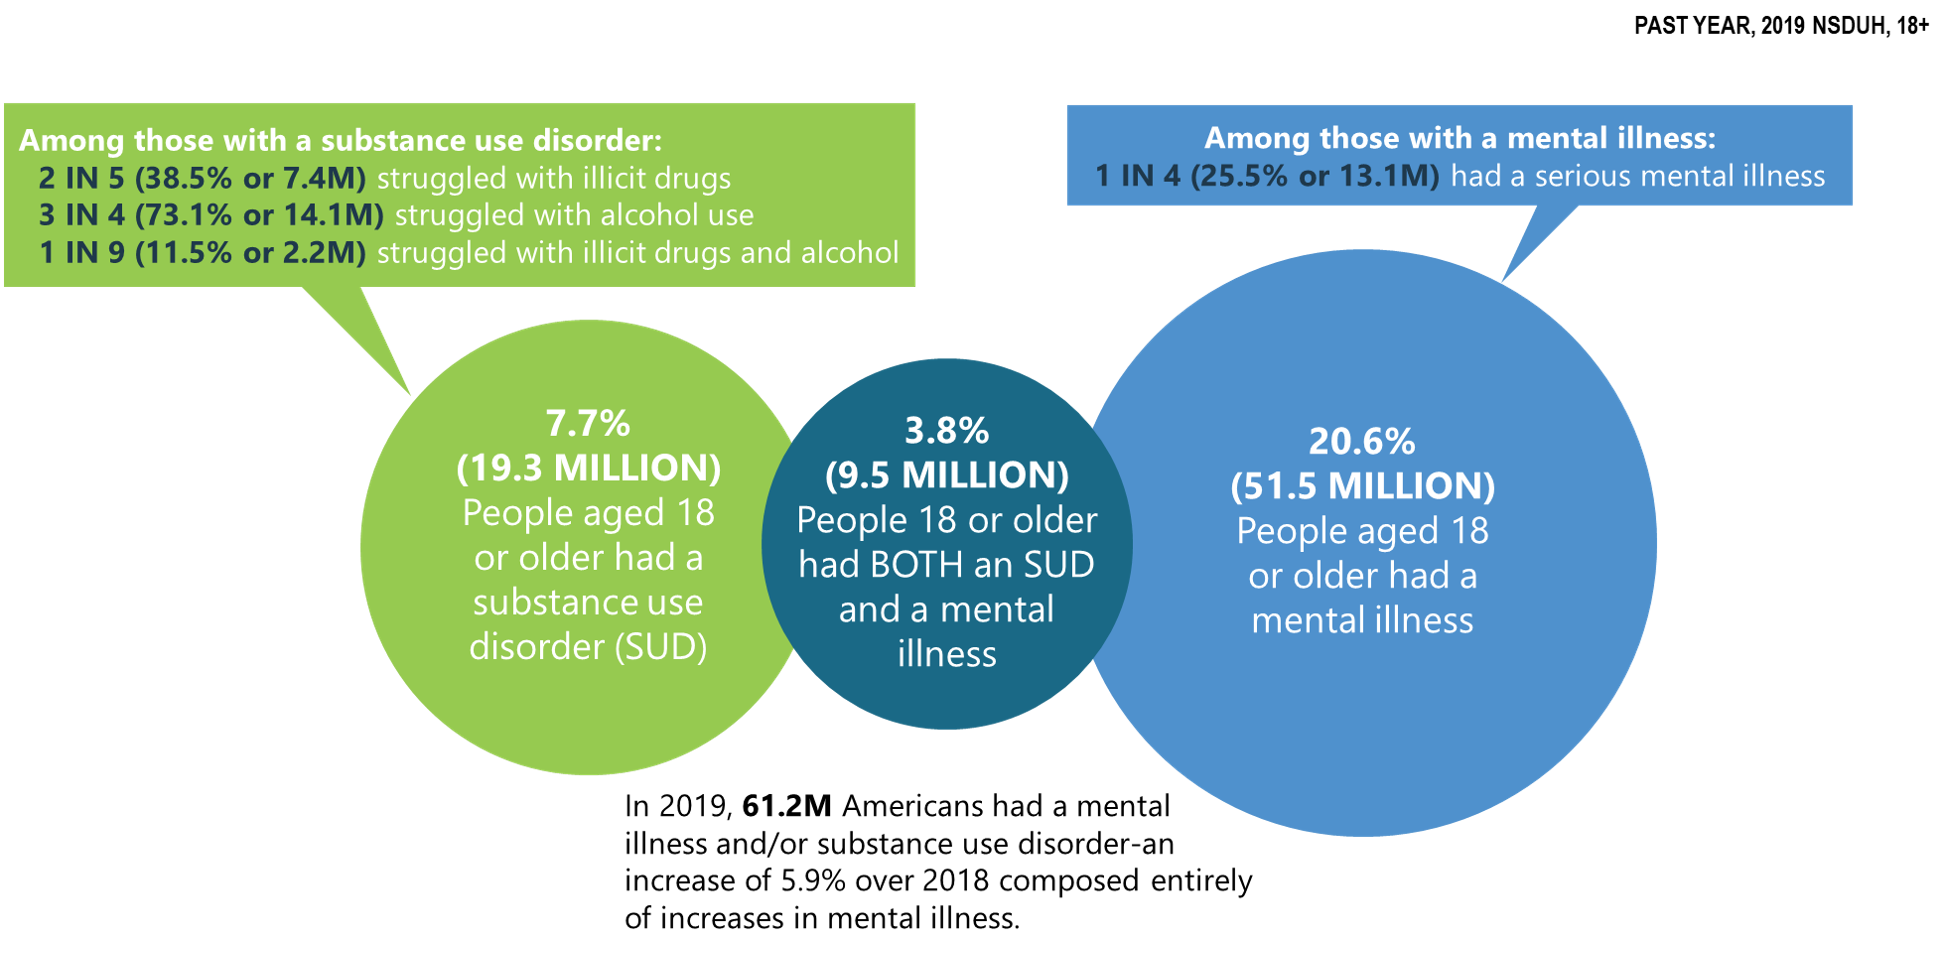 Infographic of the results of the 2019 National Survey of Drug Use and Health showing information on individuals that had a substance use disorder (SUD), a mental illness, and those with both a SUD and mental illness.